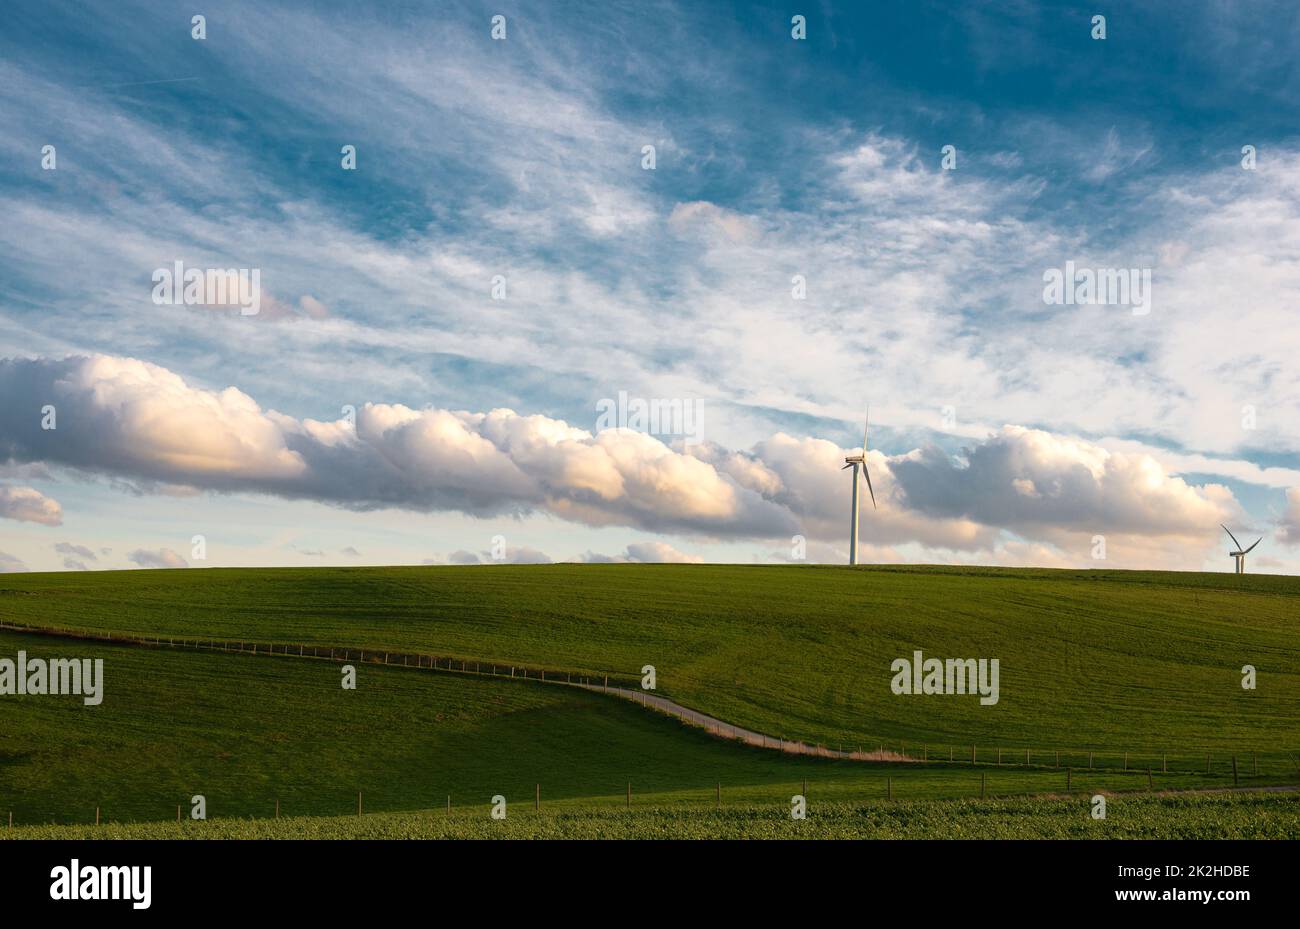 Stormy weather in the spring, clouds in the sky, green meadow, agriculture in Germany, landscape, wind energy and environment discussion, countryside scene Stock Photo